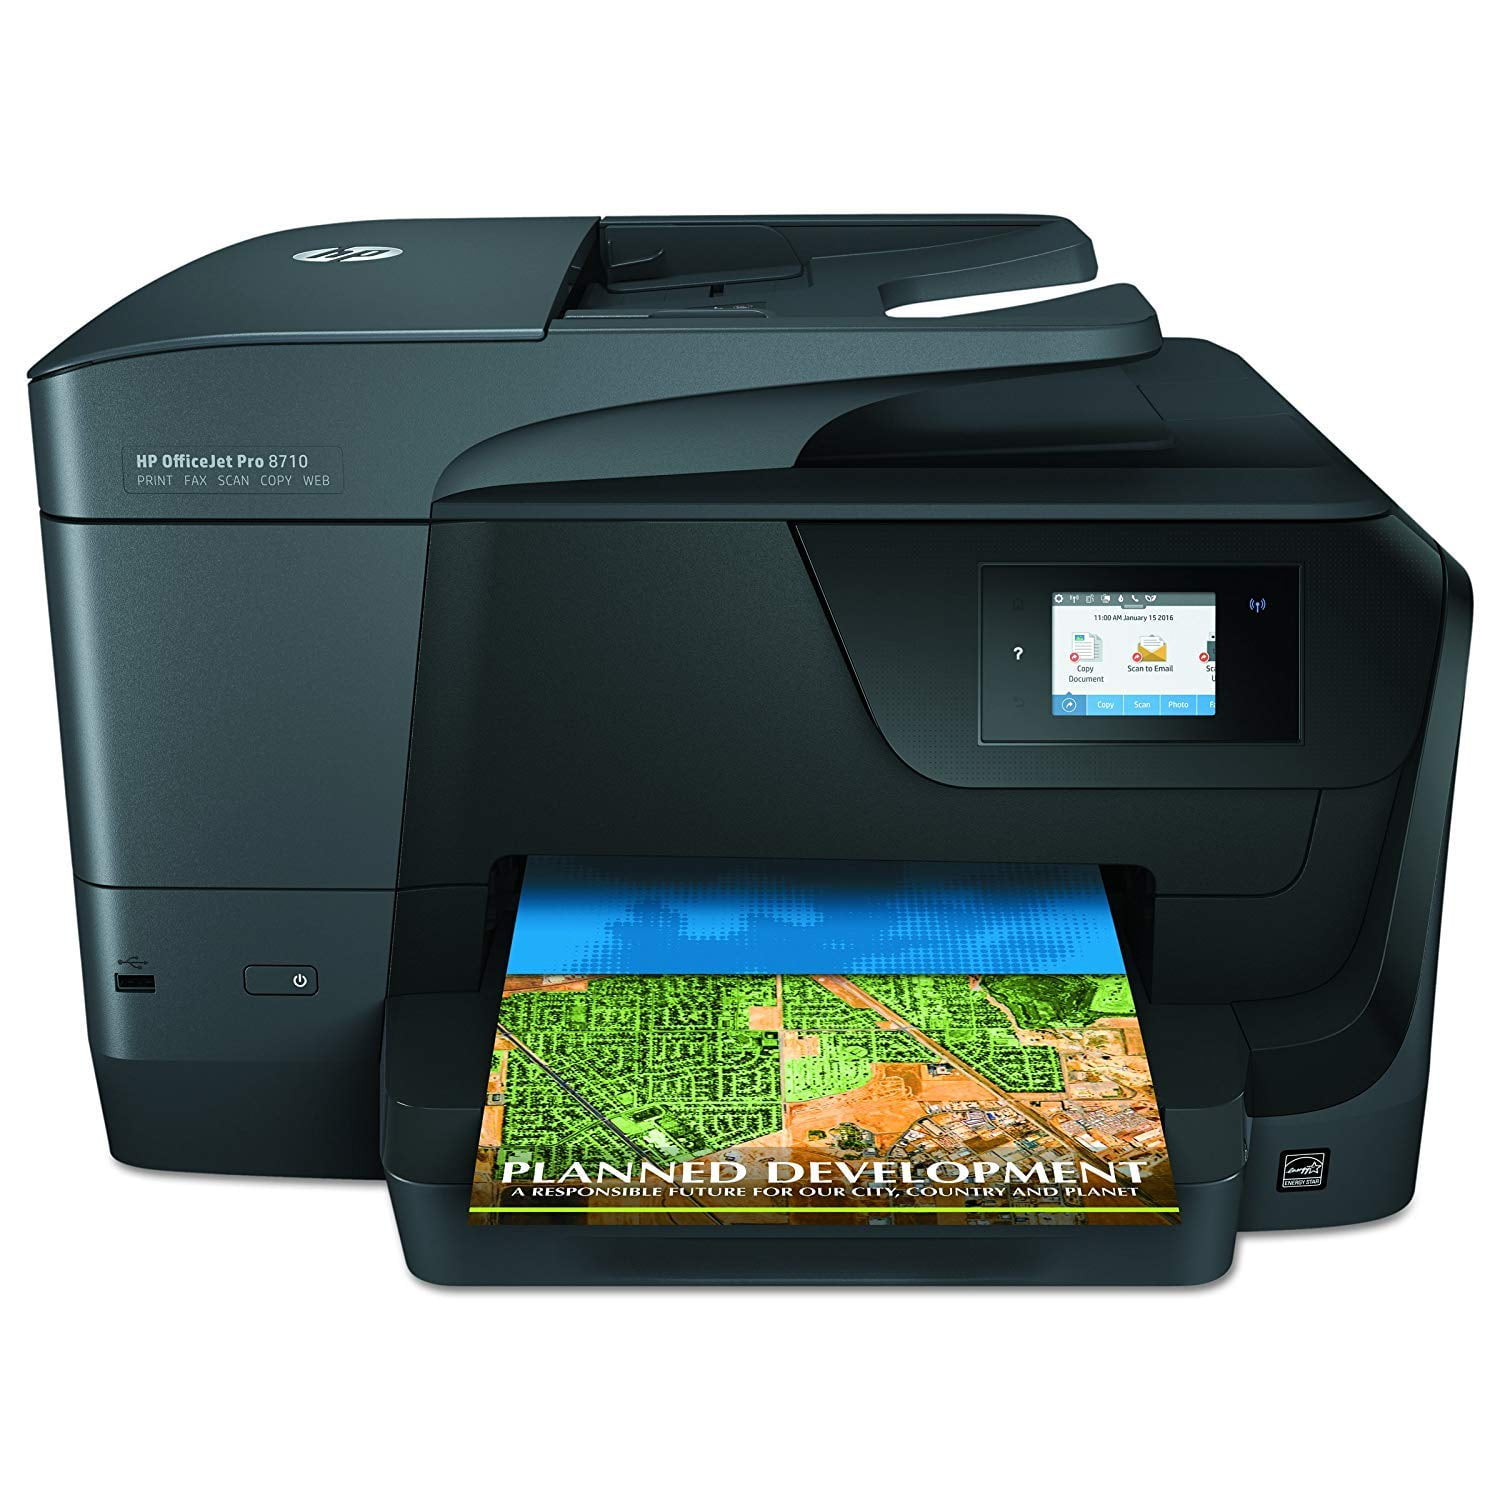 HP OfficeJet Pro 8710 (M9L66A) All-in-One Wireless Printer with Mobile